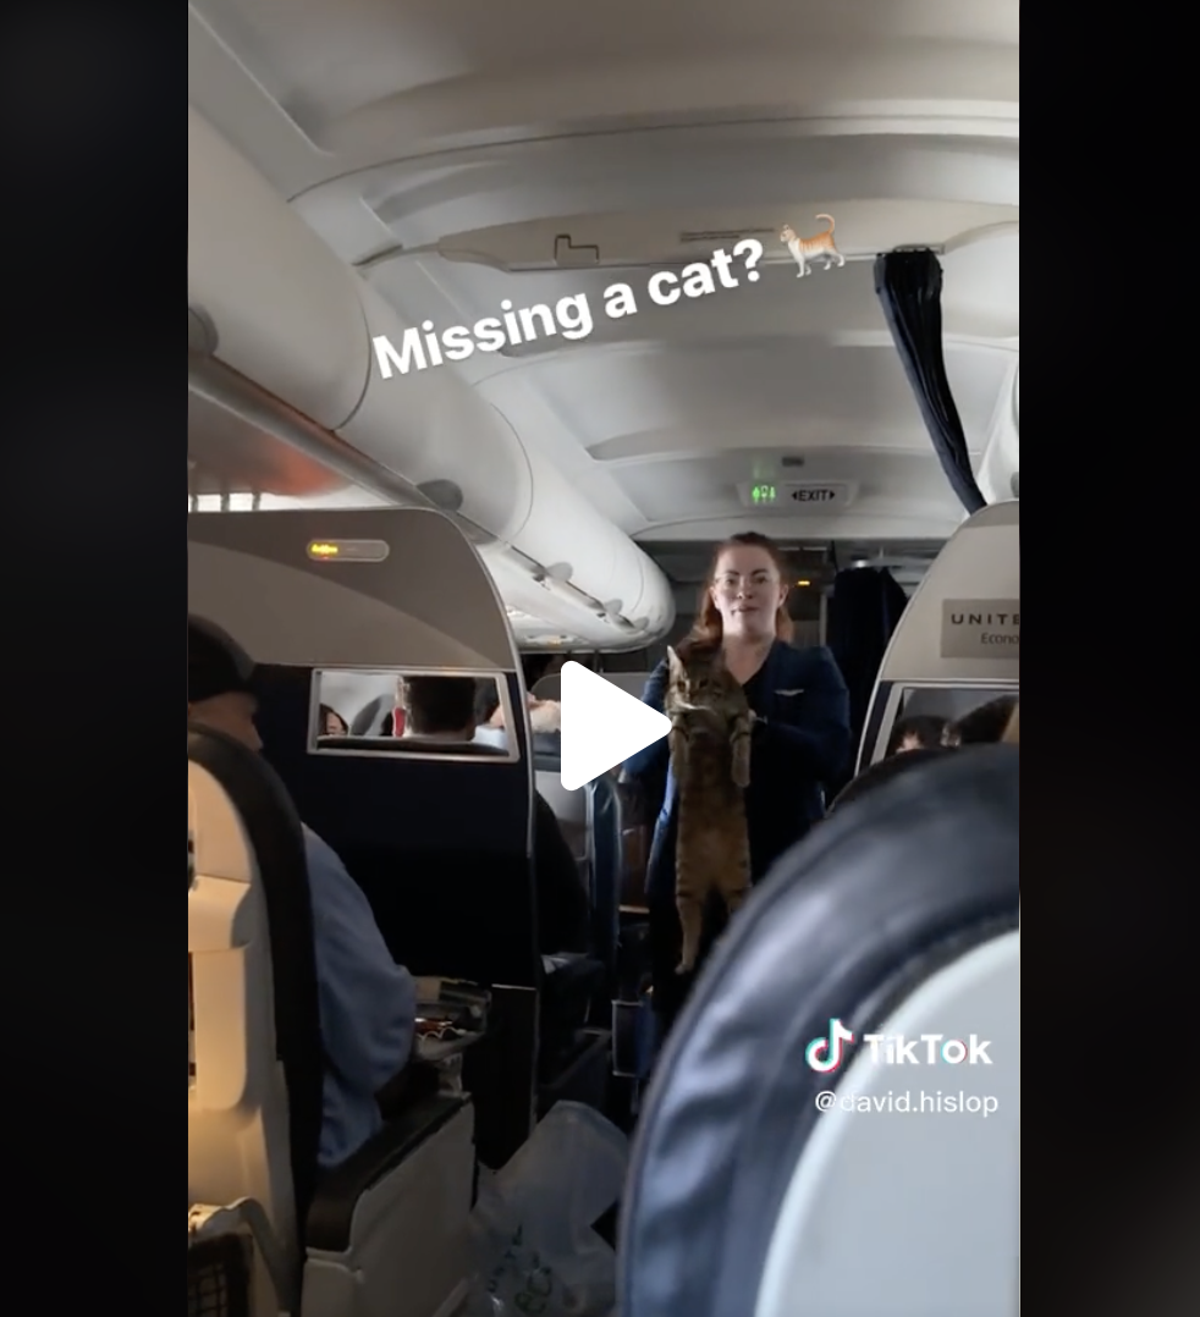 A video of the incident was posted on TikTok  (TikTok/david.hislop)